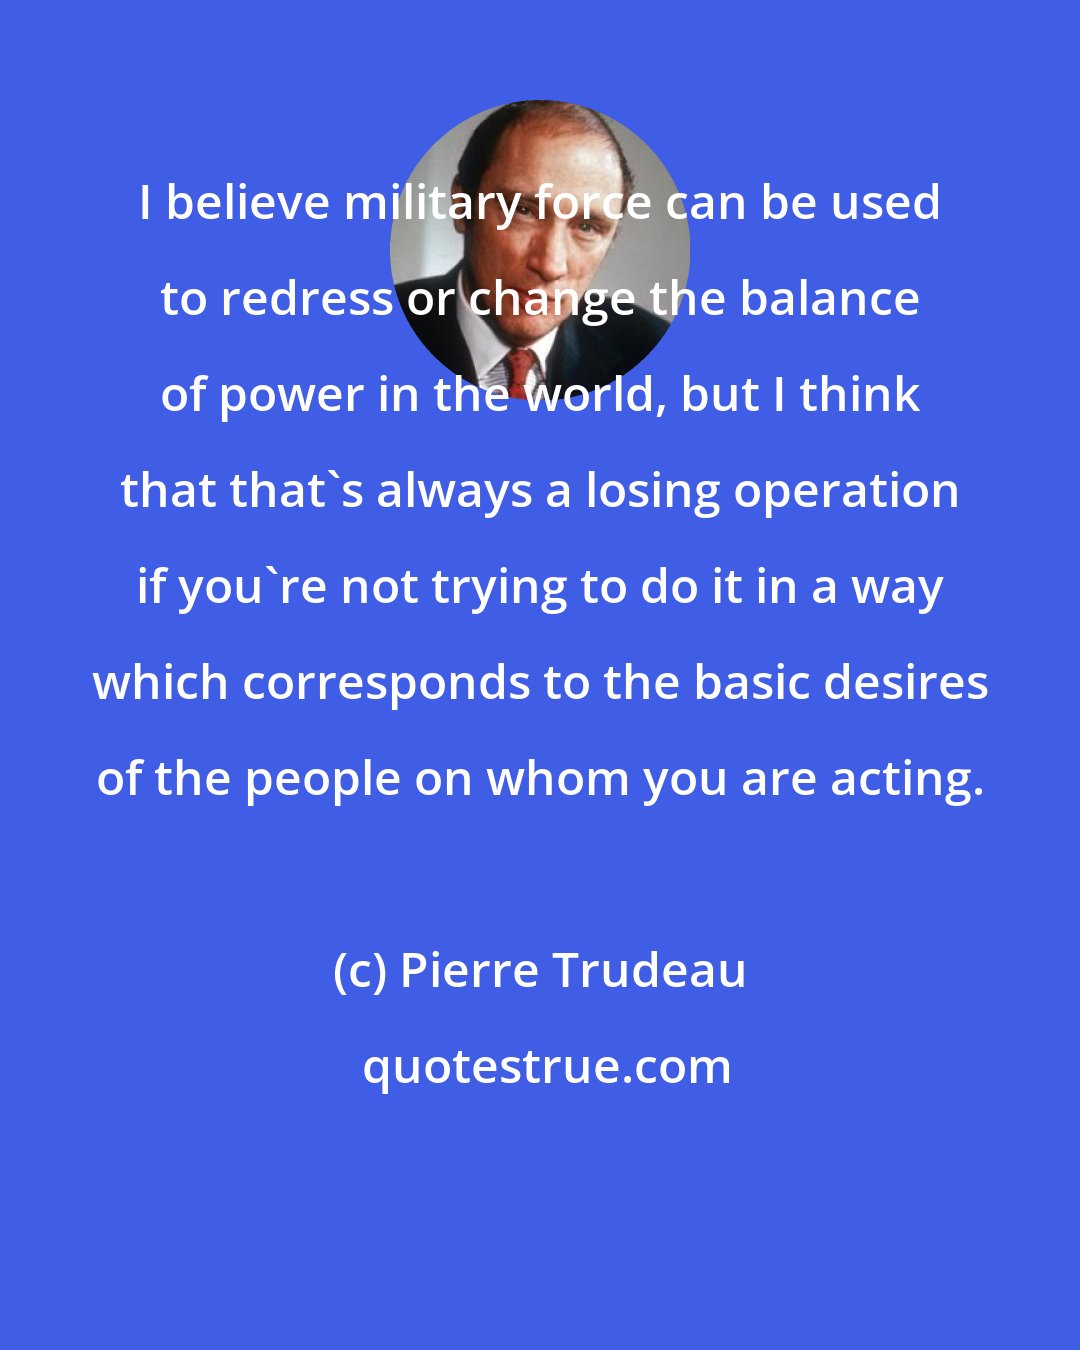 Pierre Trudeau: I believe military force can be used to redress or change the balance of power in the world, but I think that that's always a losing operation if you're not trying to do it in a way which corresponds to the basic desires of the people on whom you are acting.